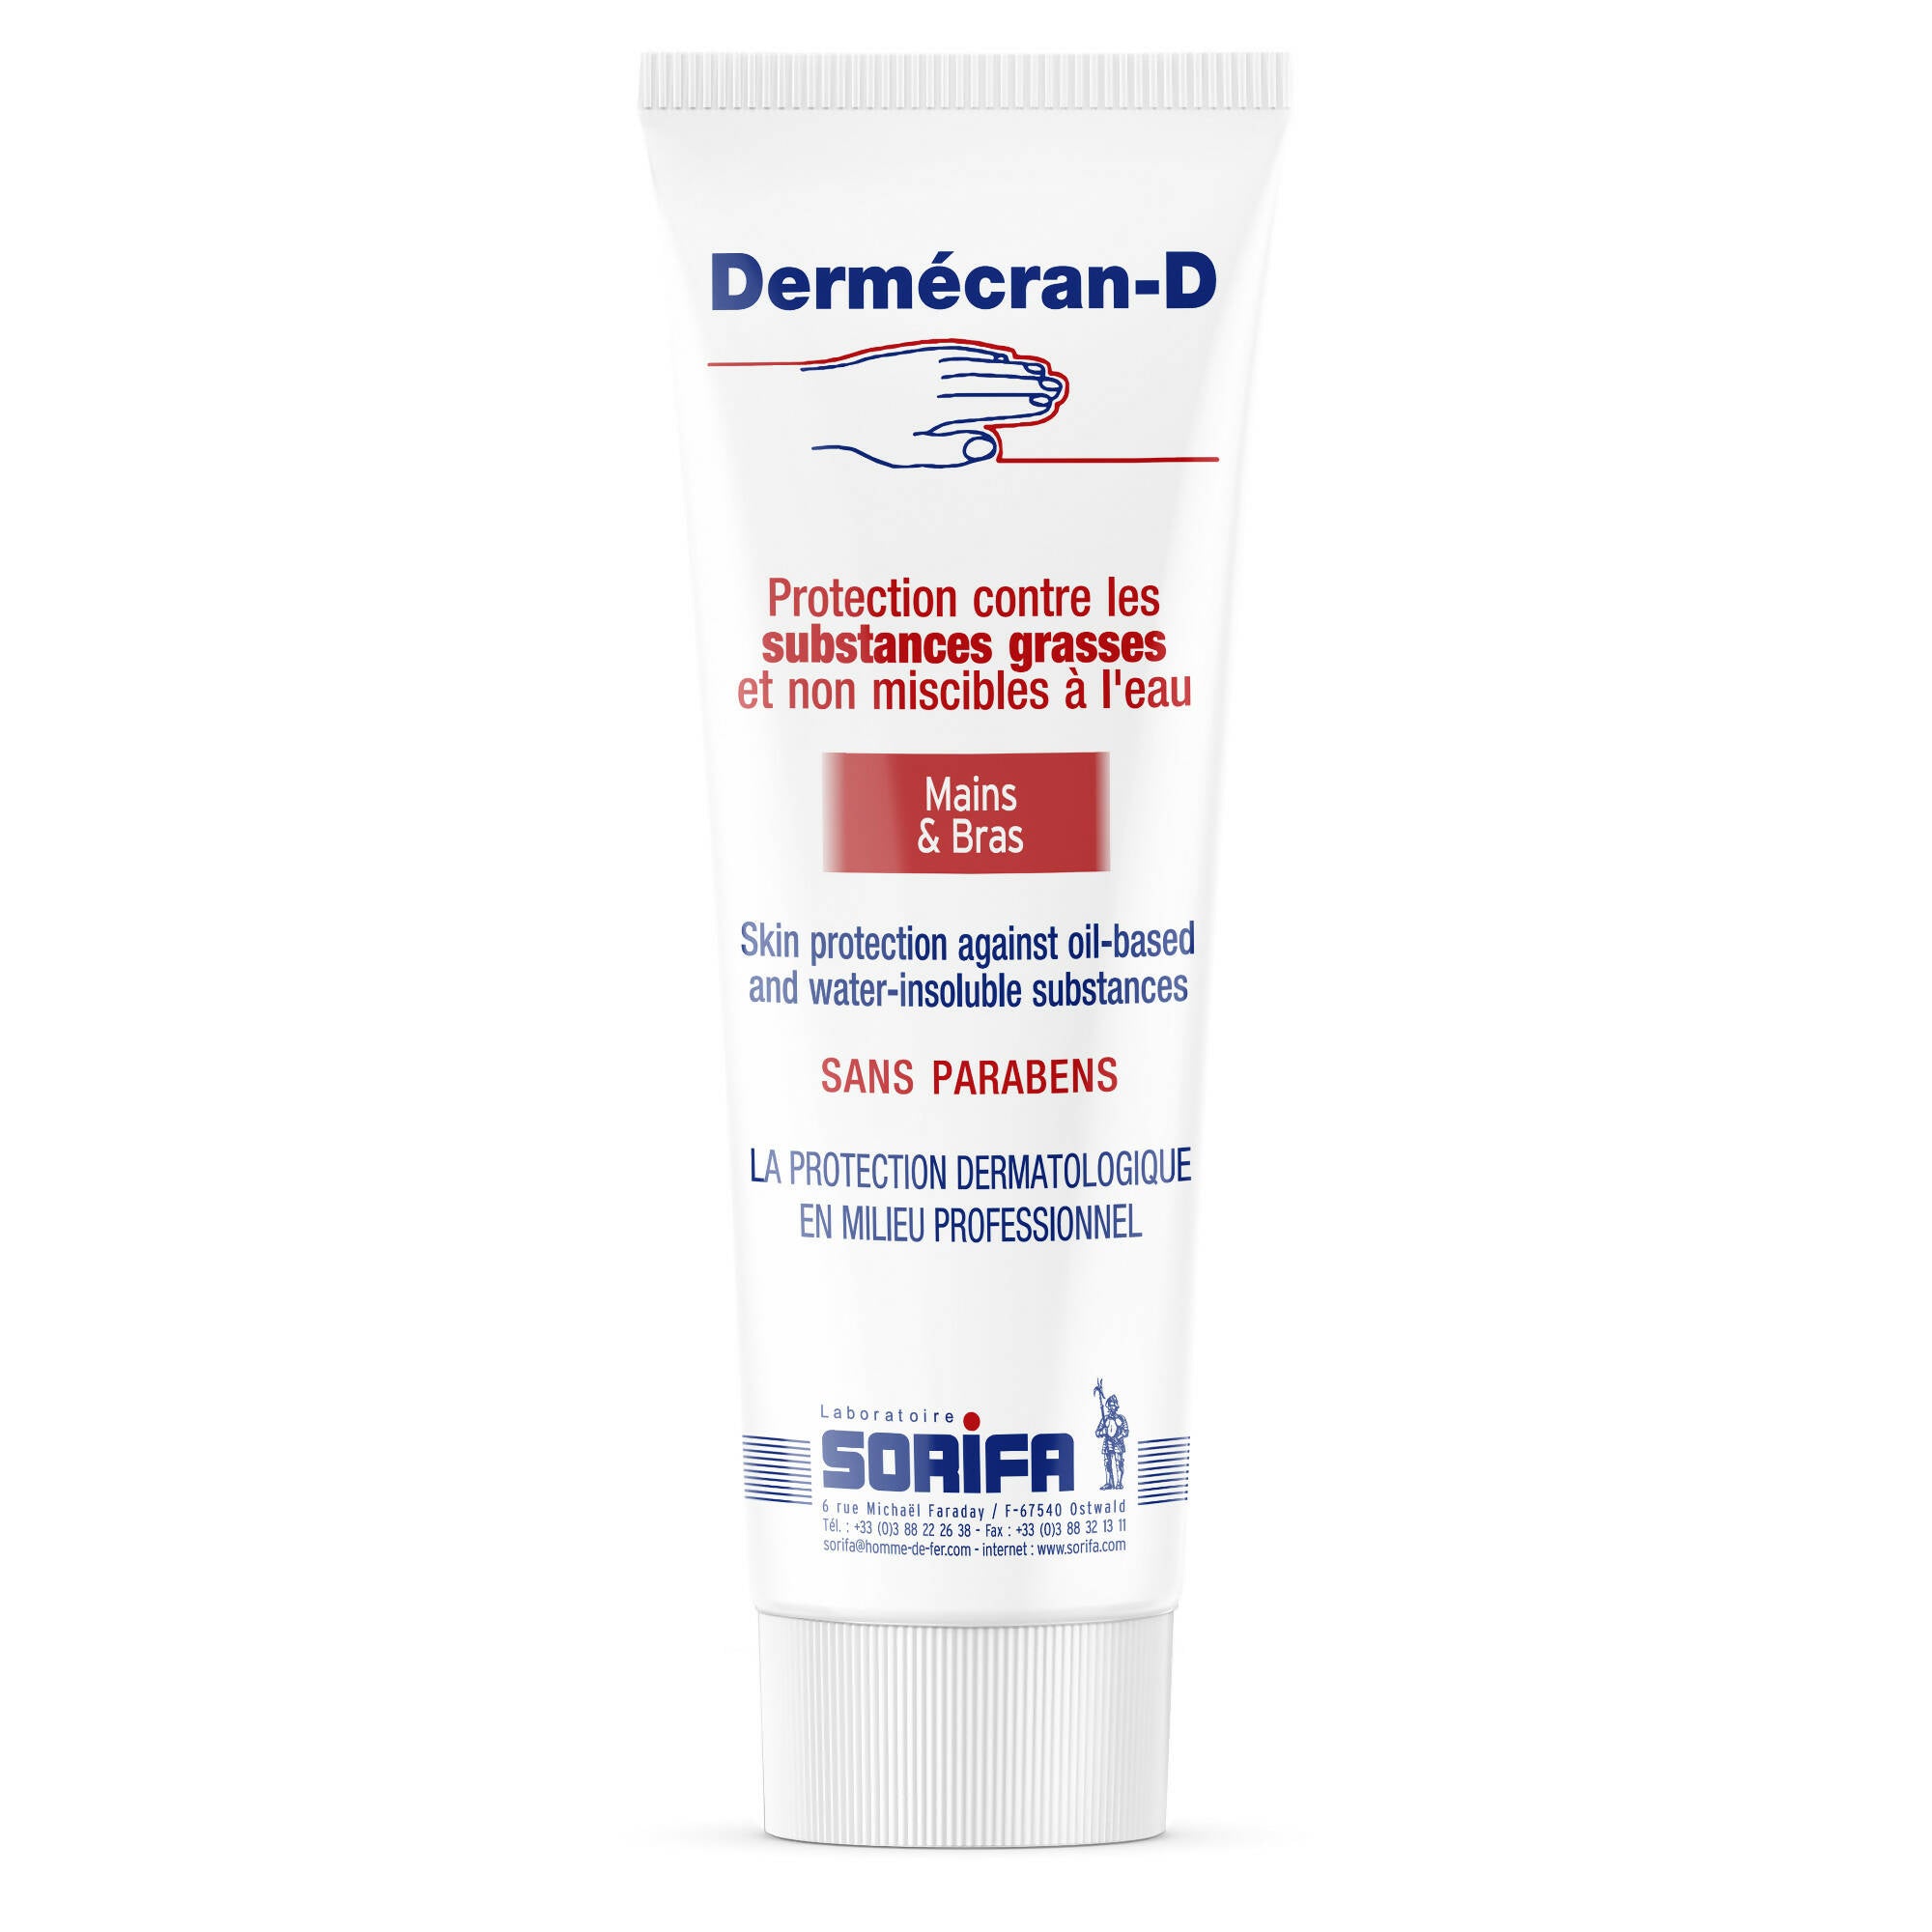 SORIFA - Complete box of 40 - Dermscreen - ANTI-GREASE protective paste - SLOOD - POWDERS - PIGMENTS - Hands and arms - High tolerance - 125 ml tube. - 0